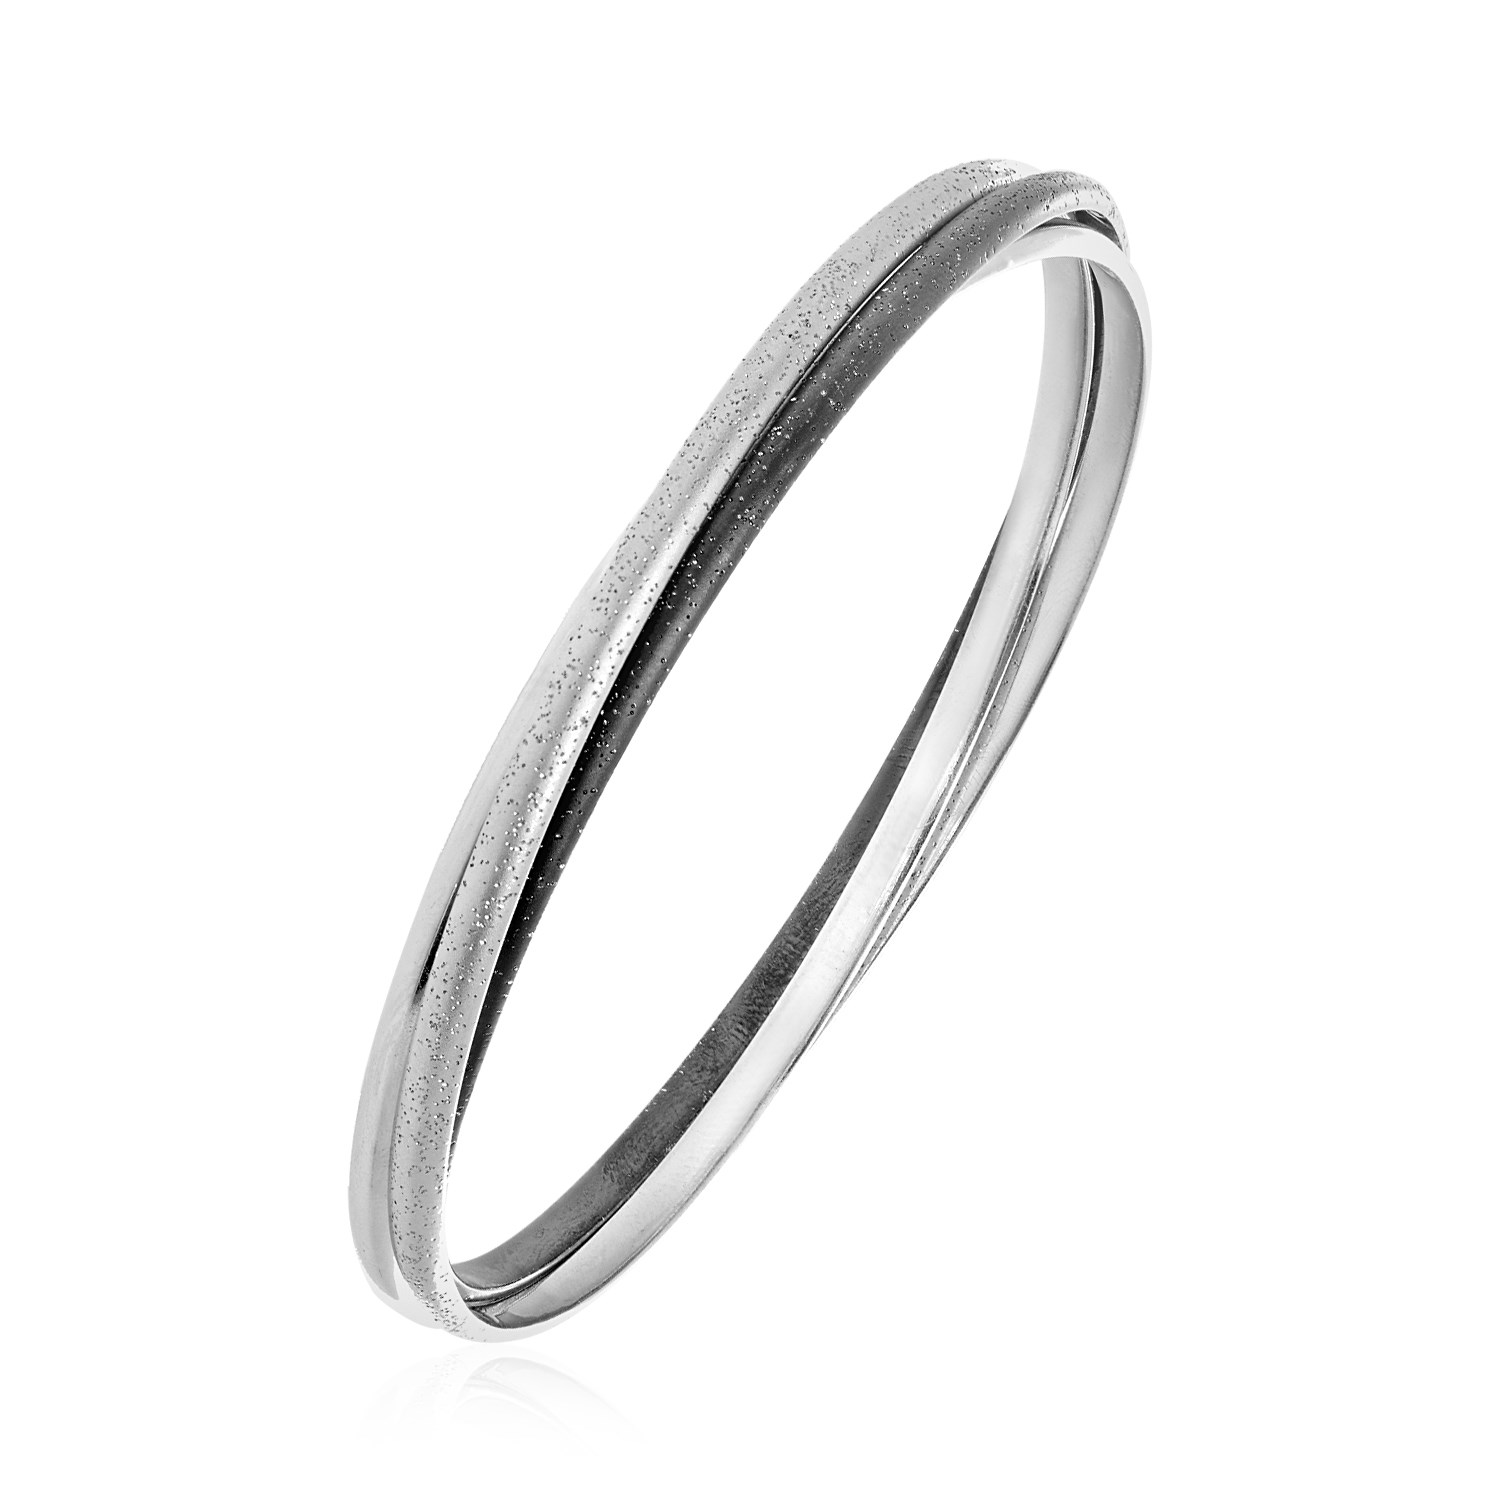 Textured Interlocking Bangle in Sterling Silver - Richard Cannon Jewelry